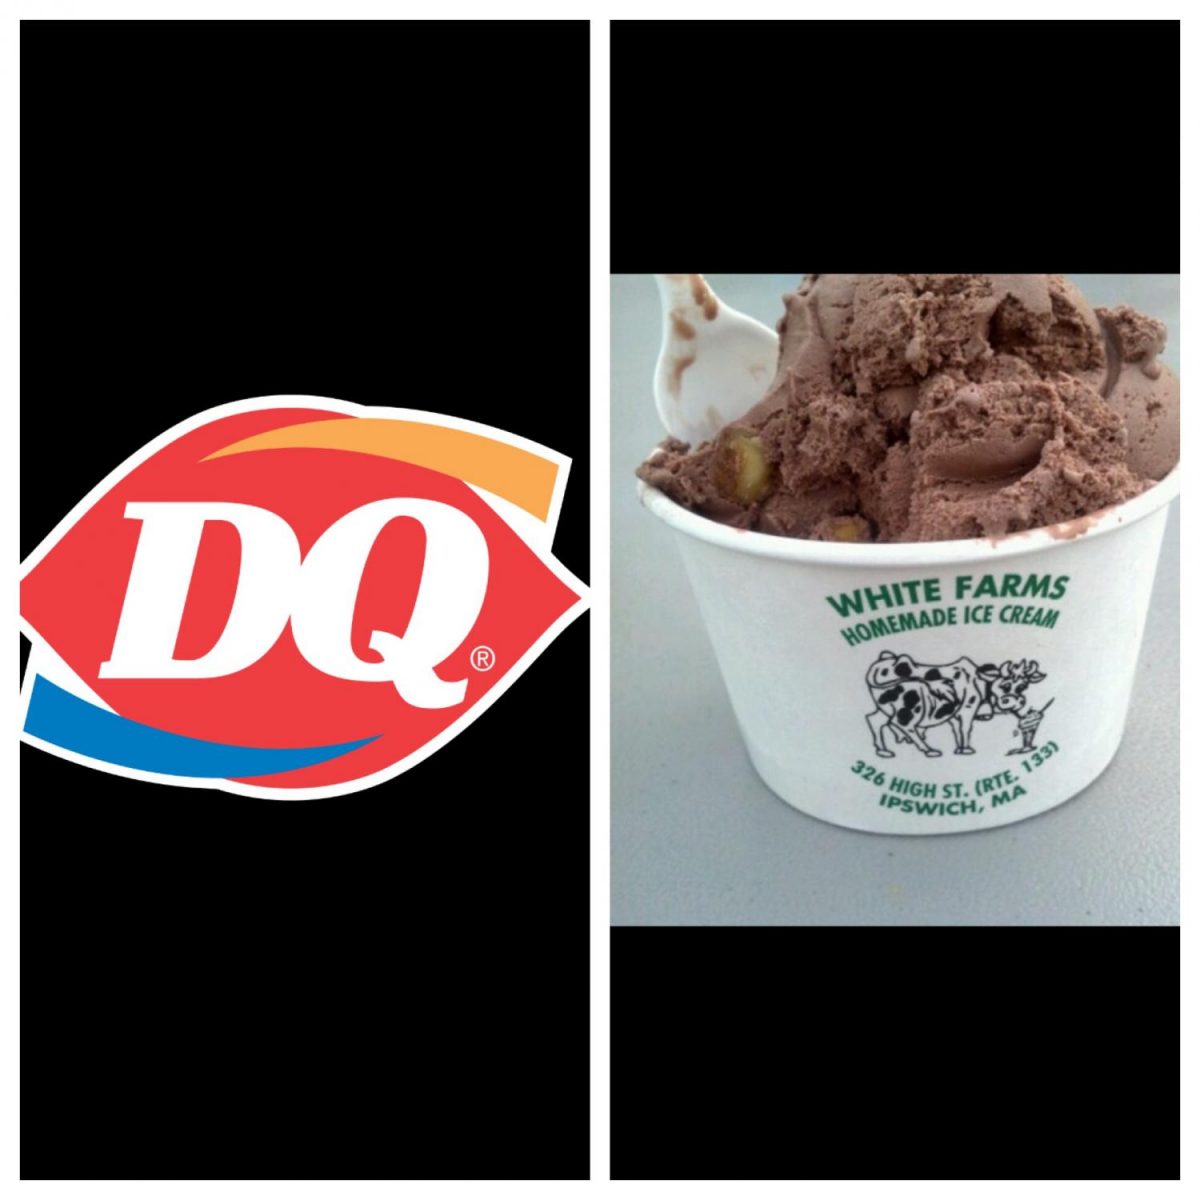 Battle of the Ice Cream Shops